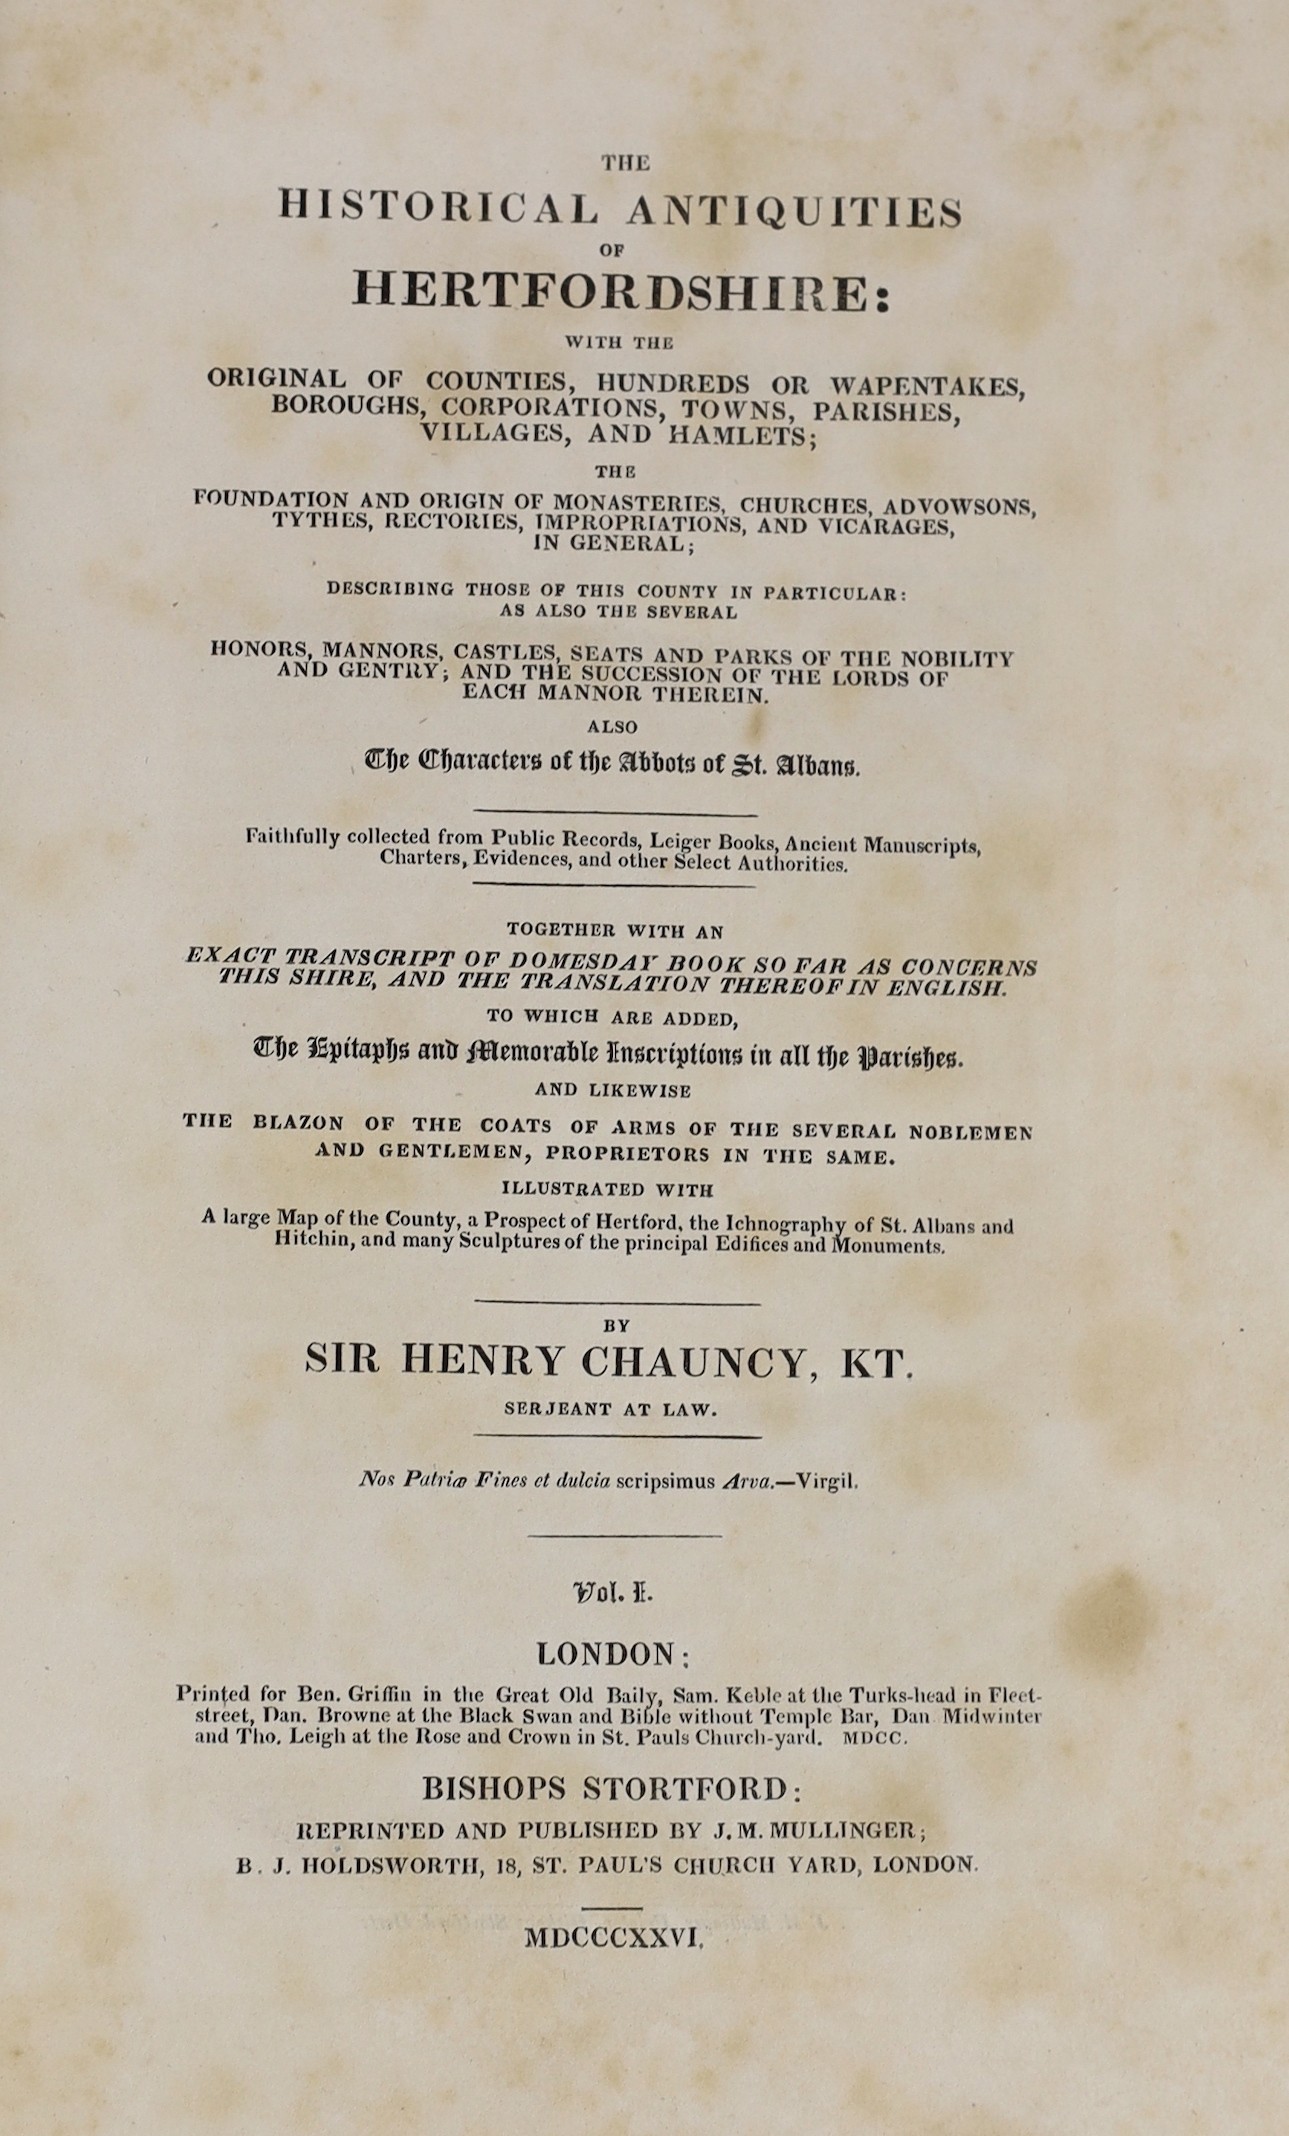 HERTS: Chauncy, Sir Henry - The Historical Antiquities of Hertfordshire ... (new edition), 2 vols. portrait, large folded map and 44 plates (mostly d-page), subscribers list; rebound 20th cent.